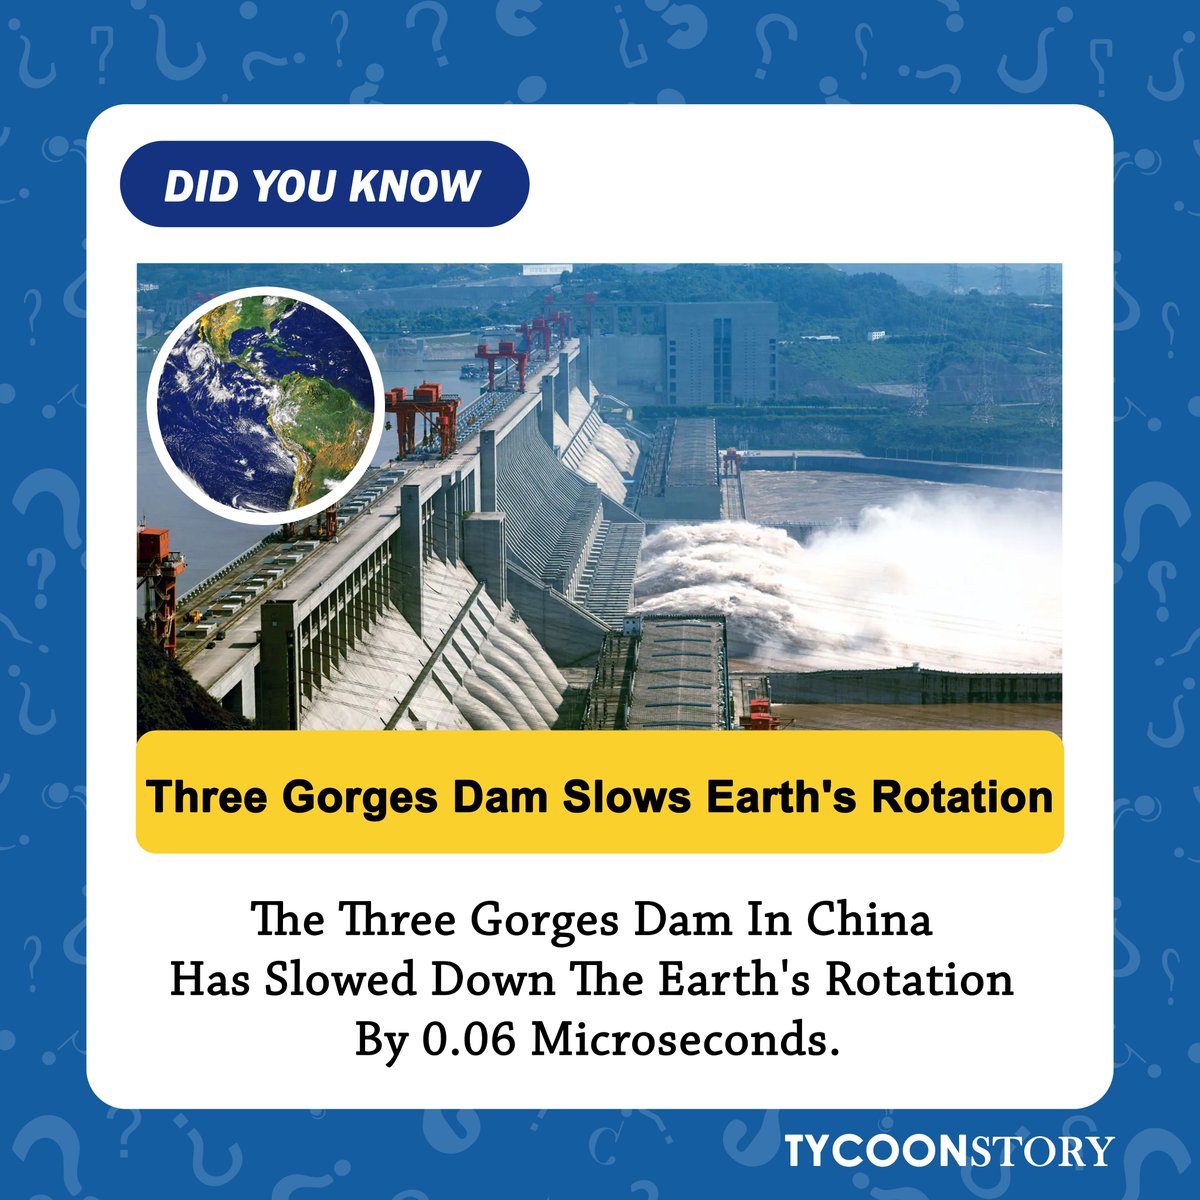 #Didyouknow

#facts #knowledge #didyouknowfacts #dailyfacts #factsdaily #factsoftheday #unknownfacts #truefacts #threegorgesdam #China #earthrotation